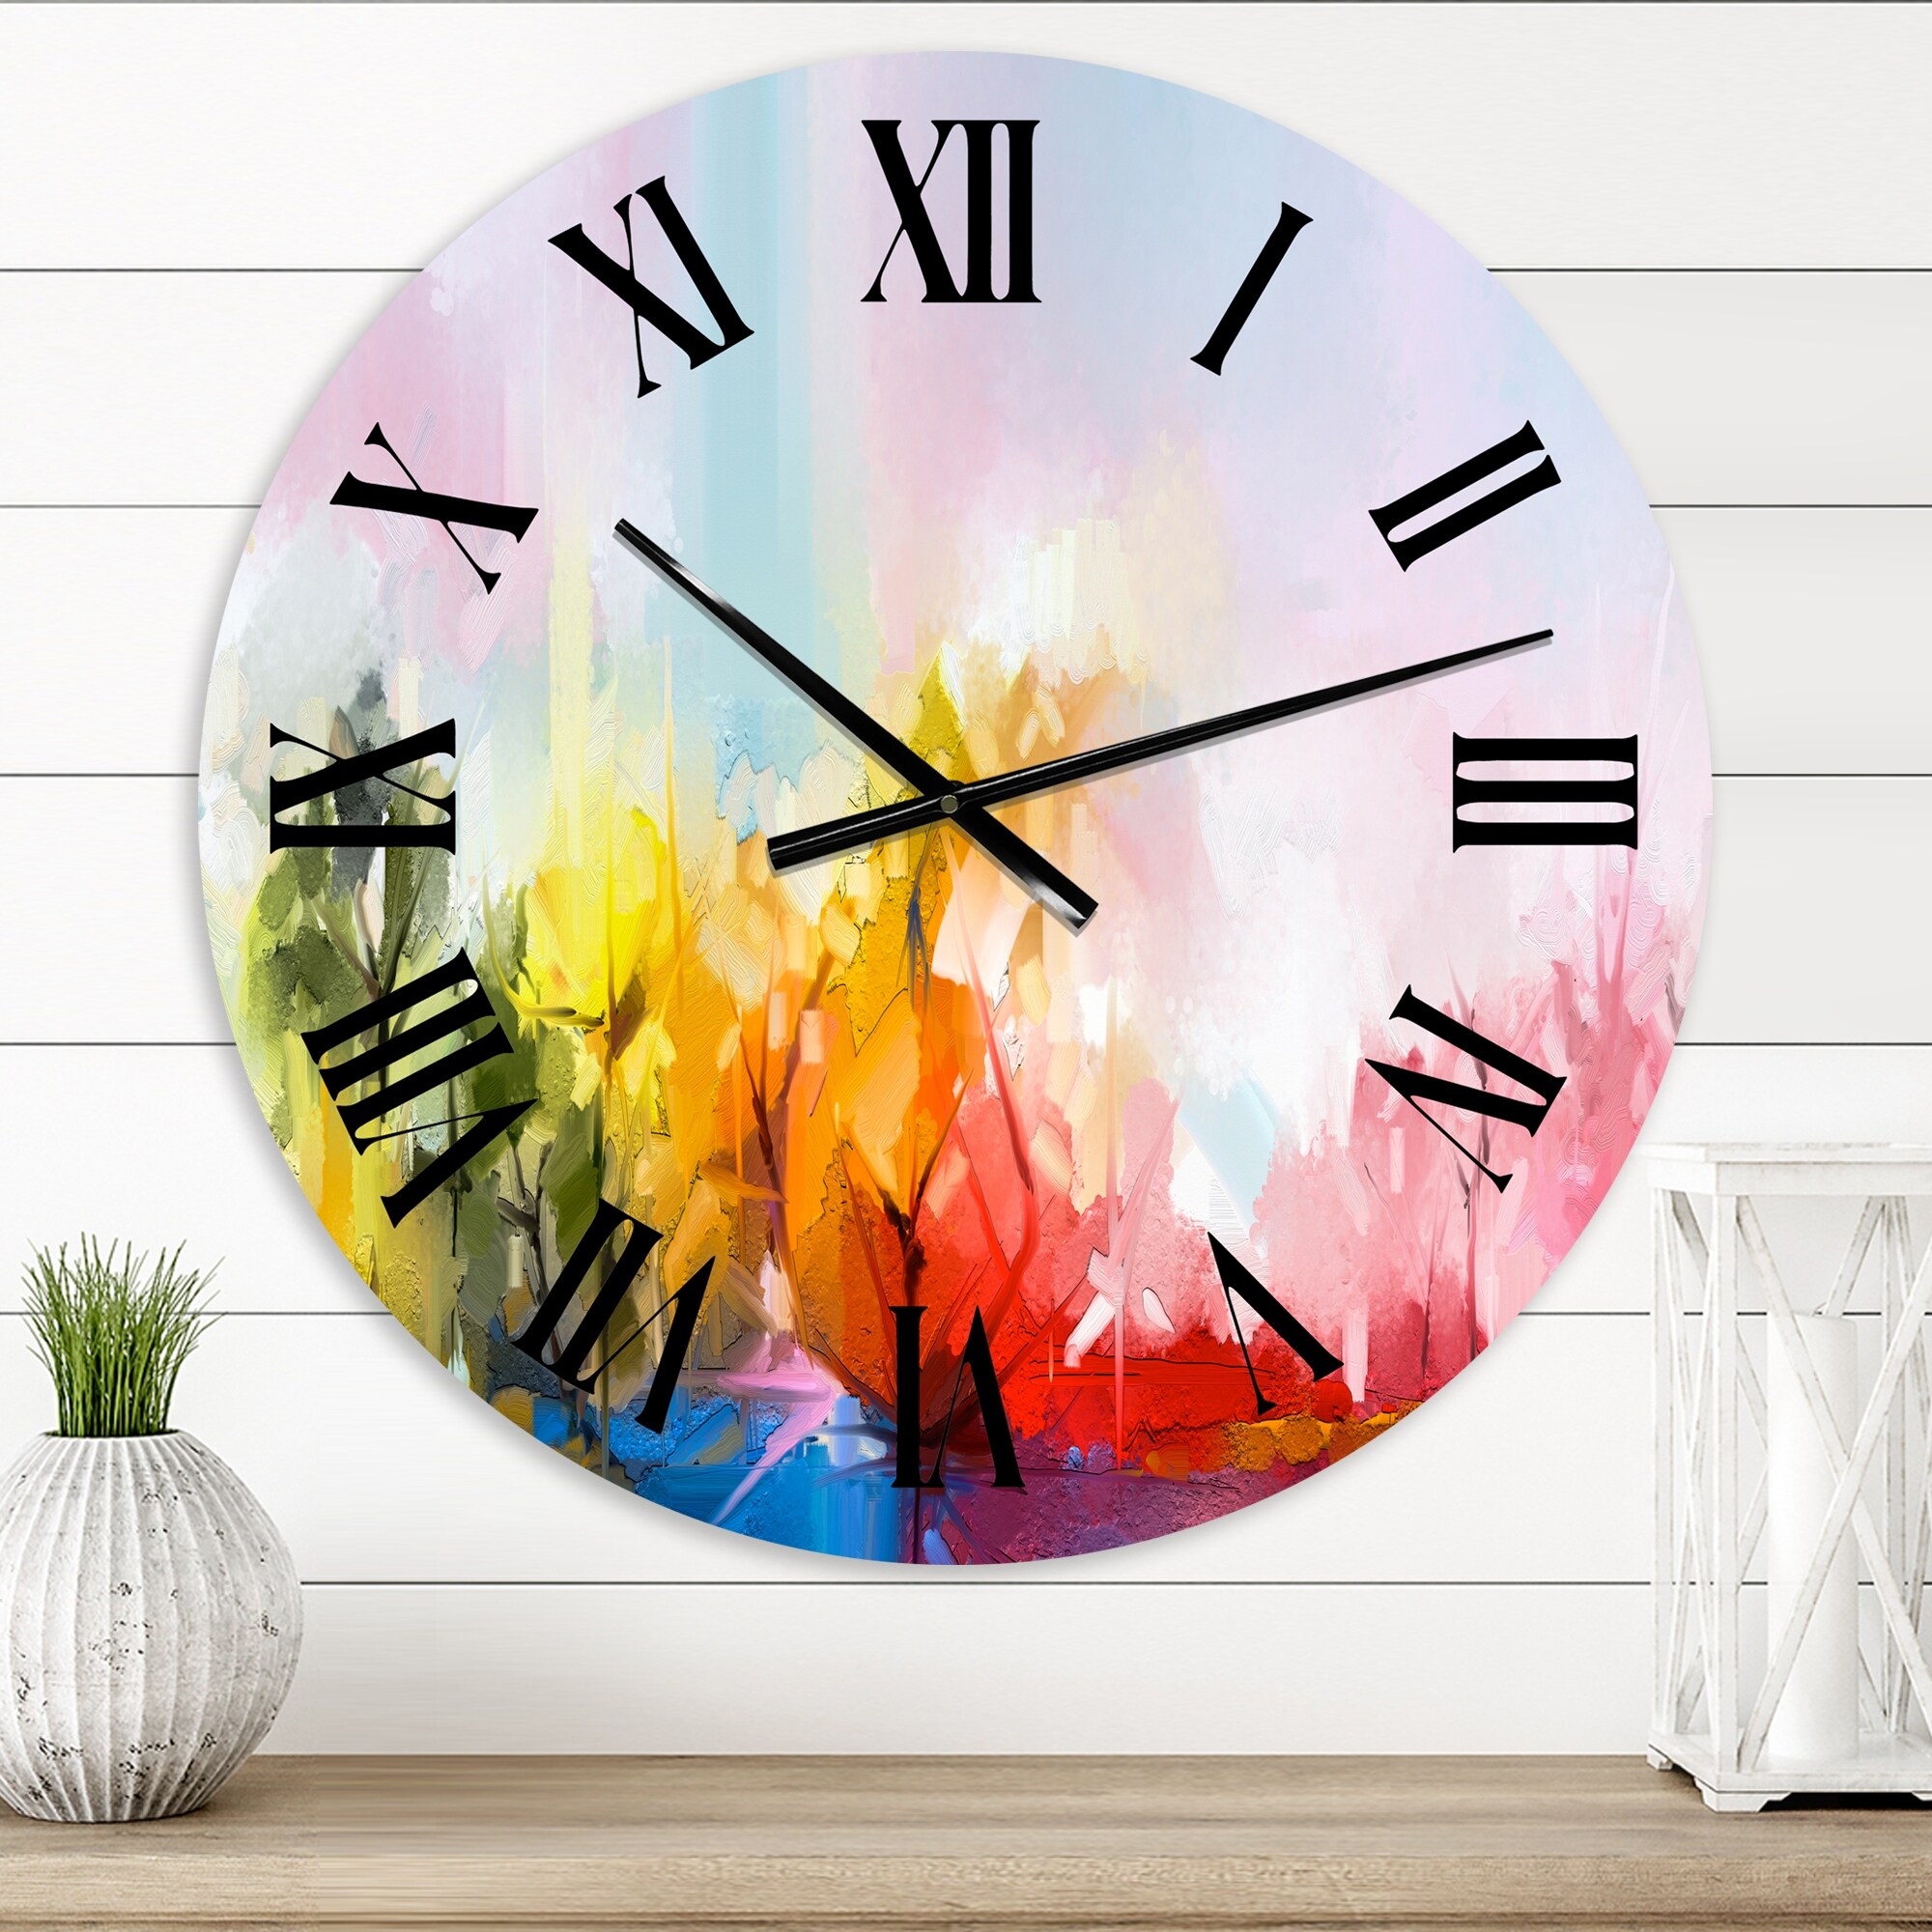 https://ak1.ostkcdn.com/images/products/is/images/direct/8dfceab84348e5effe14fae01403769e23446cfc/Designart-%27Abstract-Tree-in-Colorful-Meadow%27-Modern-wall-clock.jpg